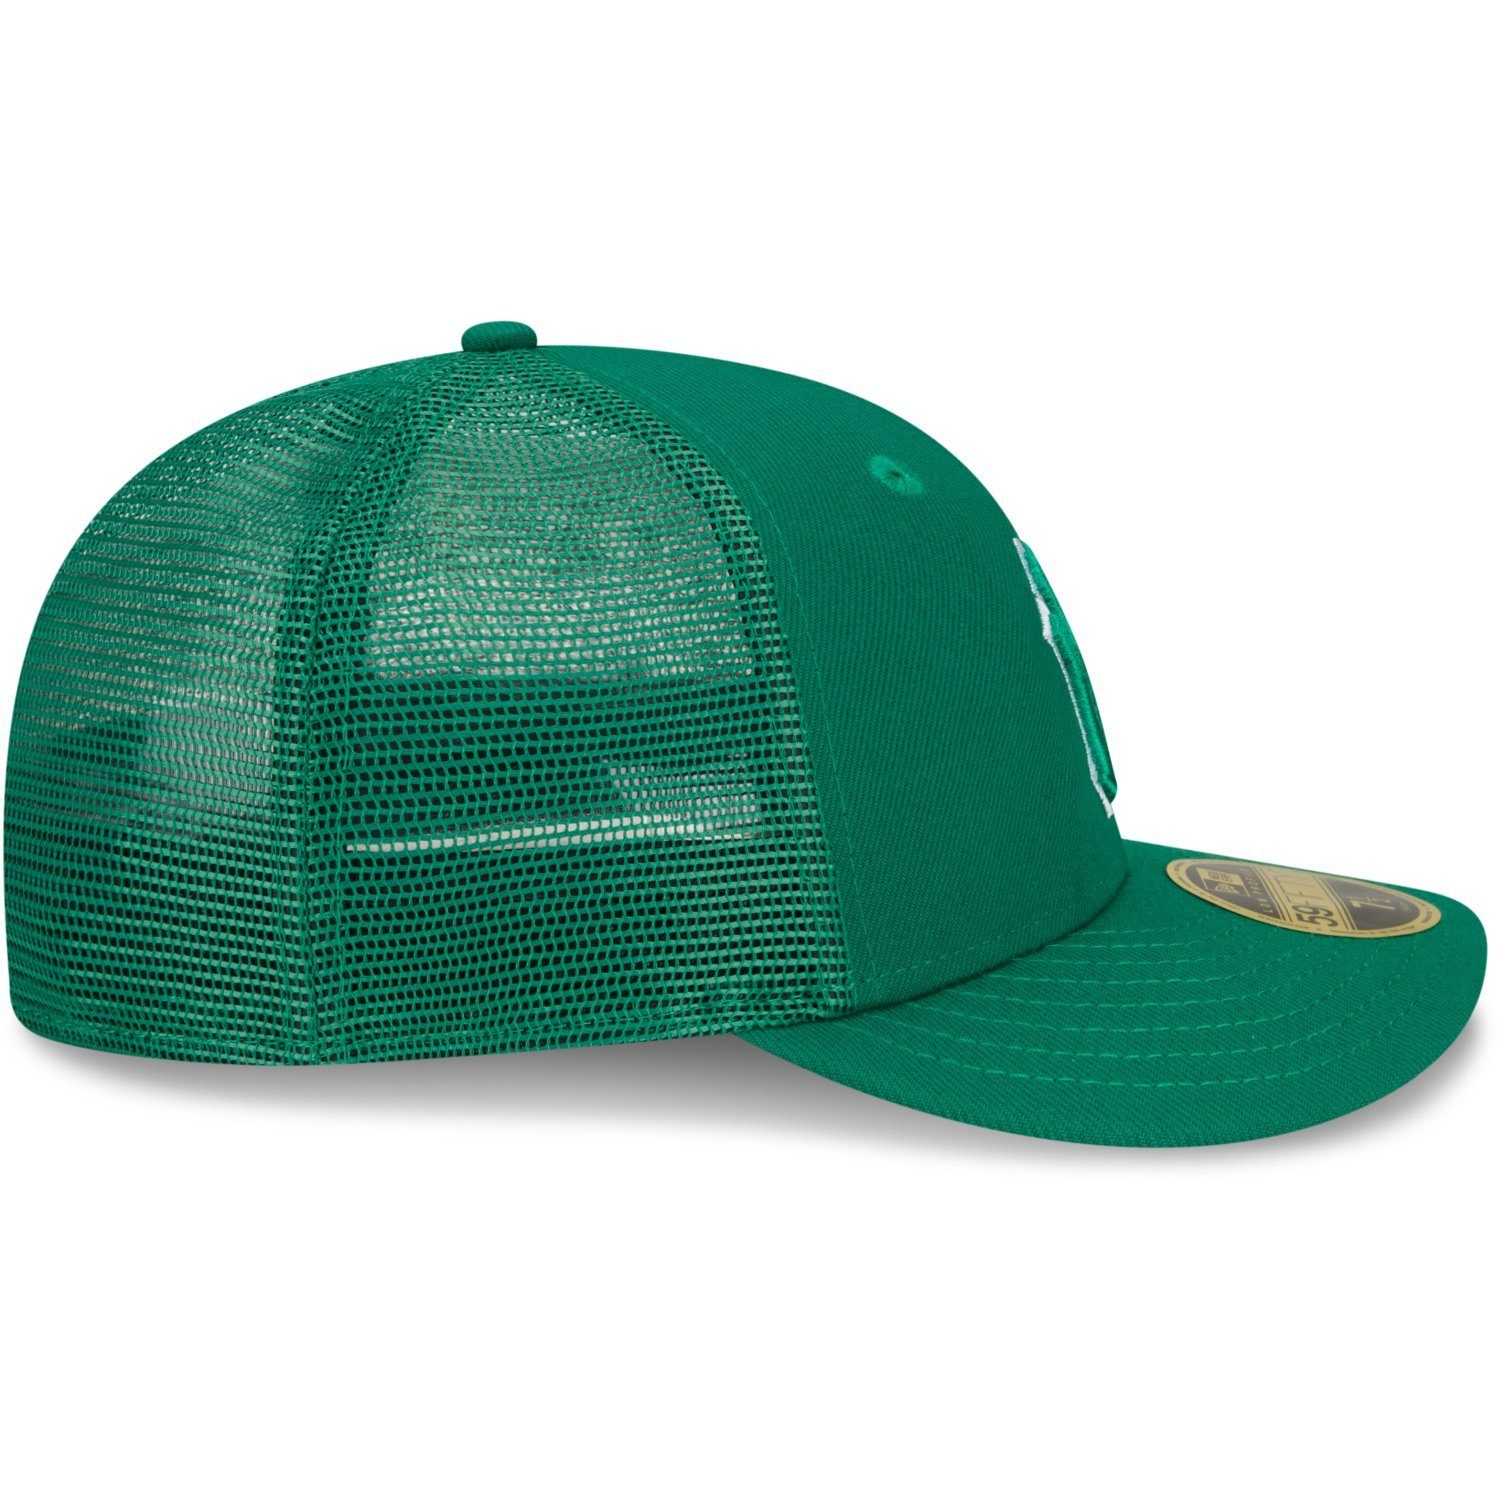 New Era Fitted PATRICK’S DAY Profile York Low 59Fifty Cap ST. New